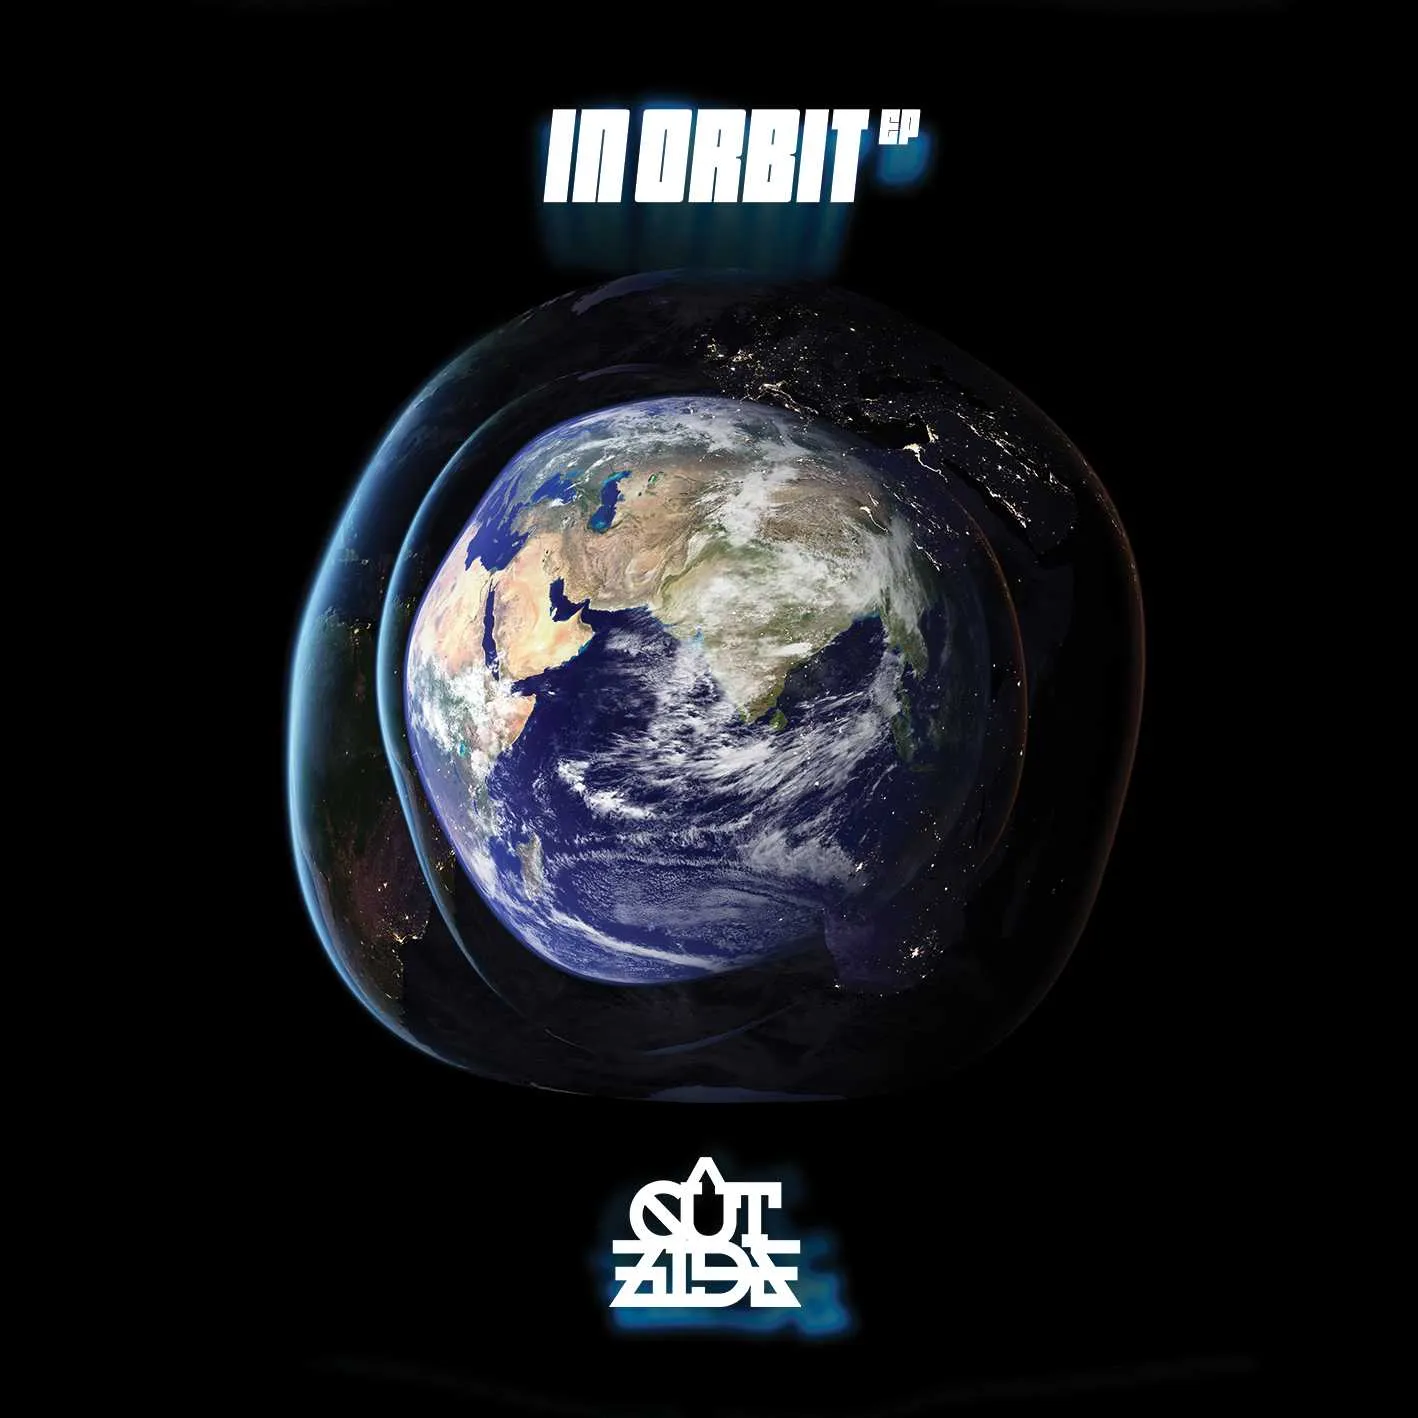 Album cover for “In Orbit EP” by Cutside